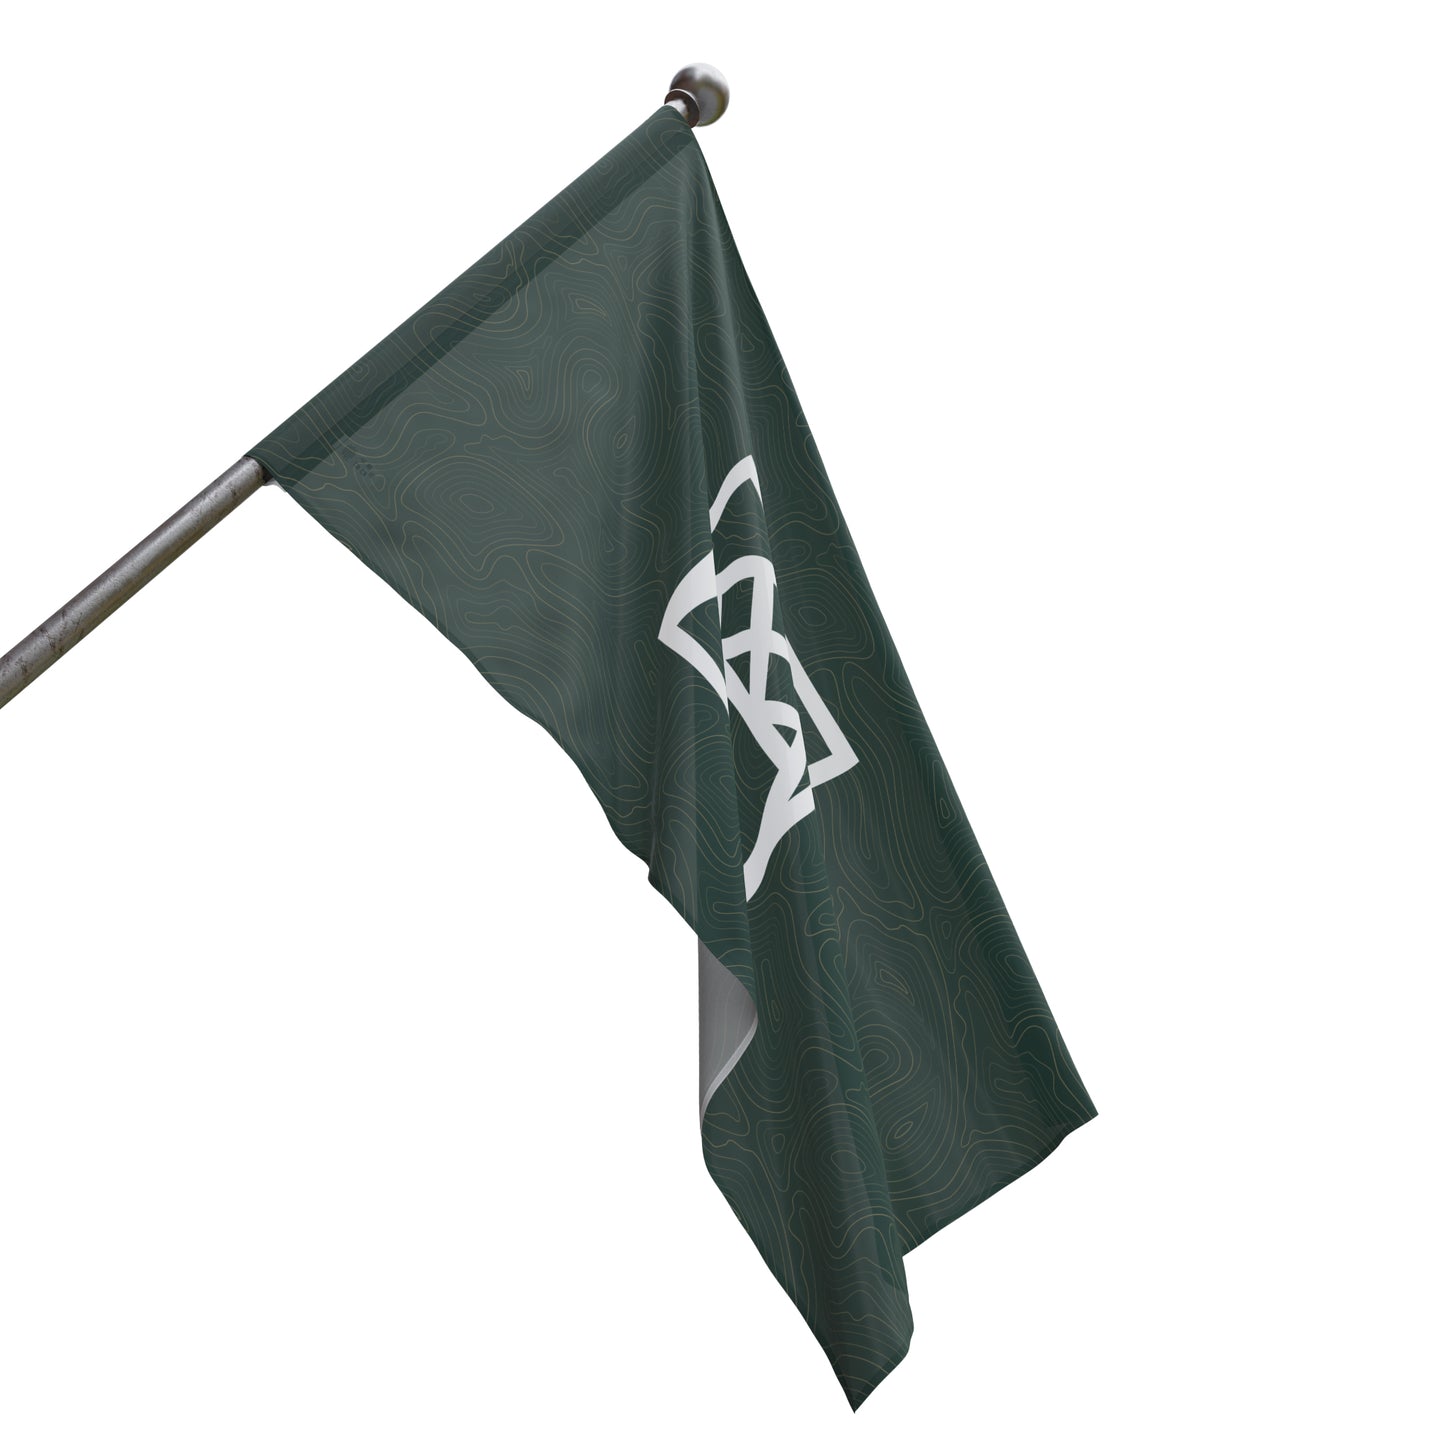 Arched Cabins LLC Official Flag